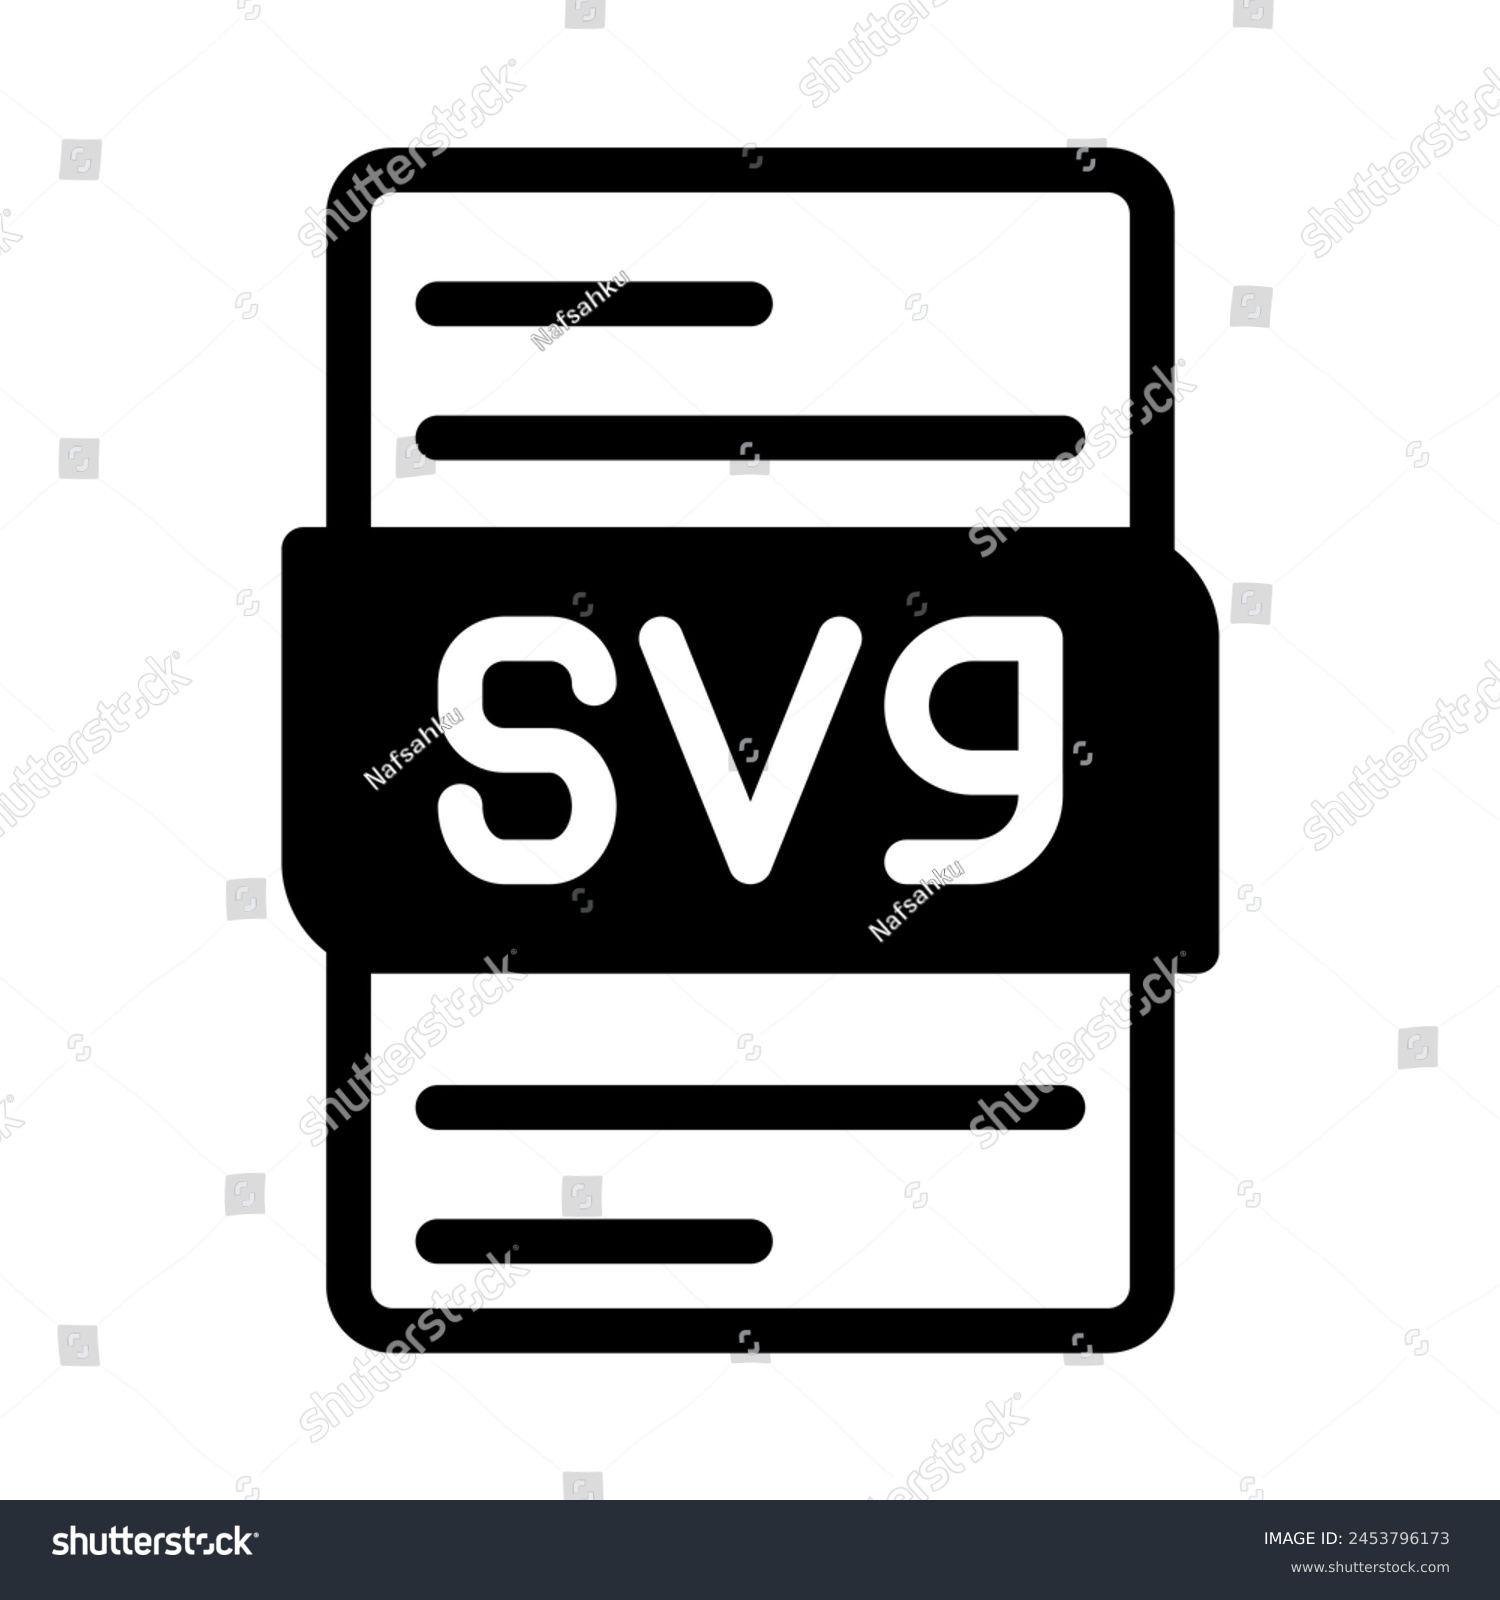 SVG of file Type Icon. Files document graphic design. with outline style. vector illustration. svg